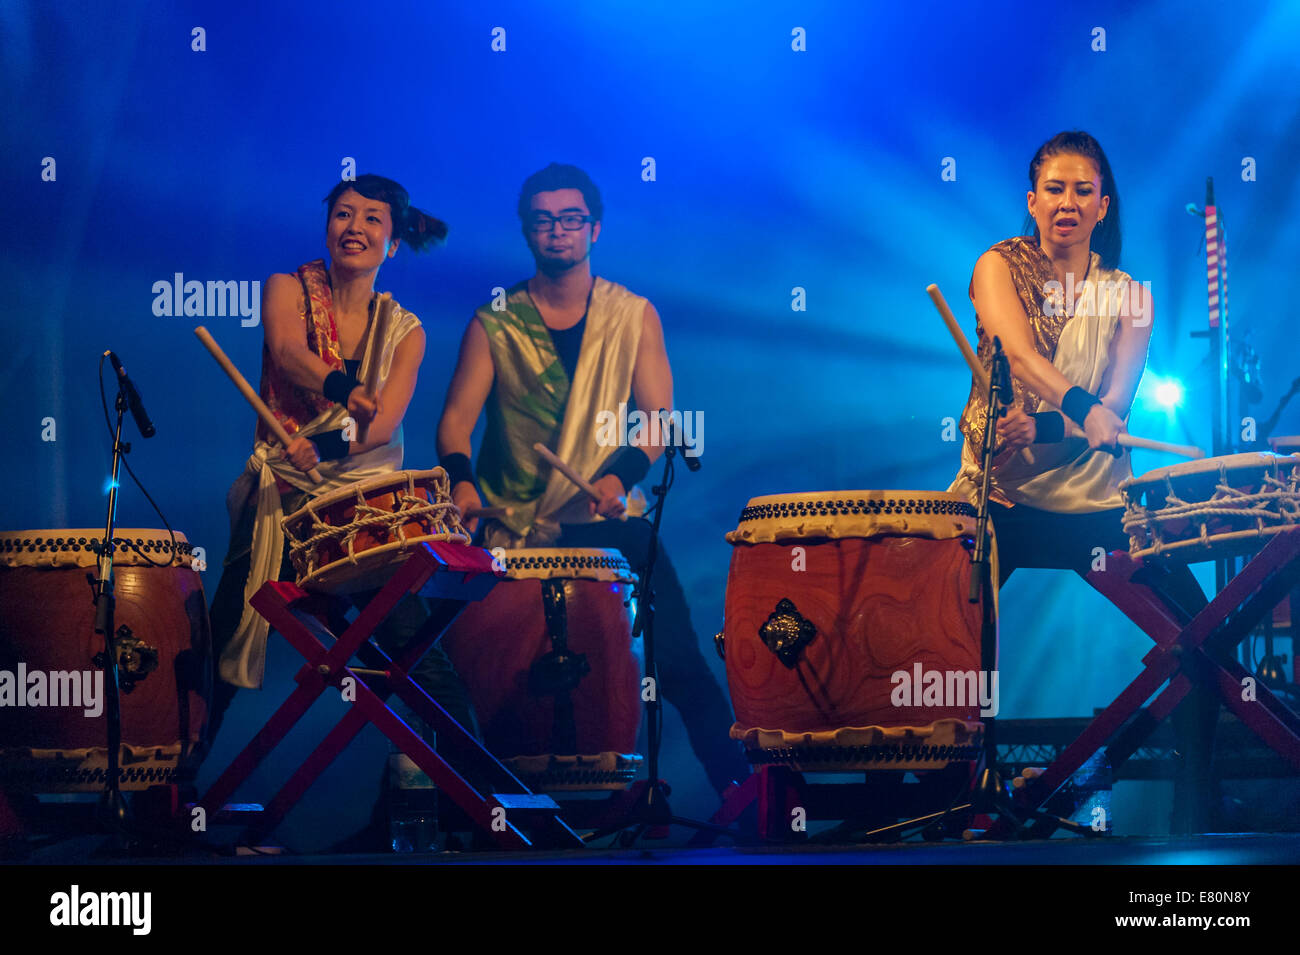 London, UK, 27 September 2014. The sixth Japan Matsuri takes place in Trafalgar Square in front of an audience of thousands of Londoners.  The  annual festival showcases many aspects of Japanese culture.  Pictured: Joji Hirota London Taiko Drummers perform the Grand Finale.  Credit:  Stephen Chung/Alamy Live News Stock Photo